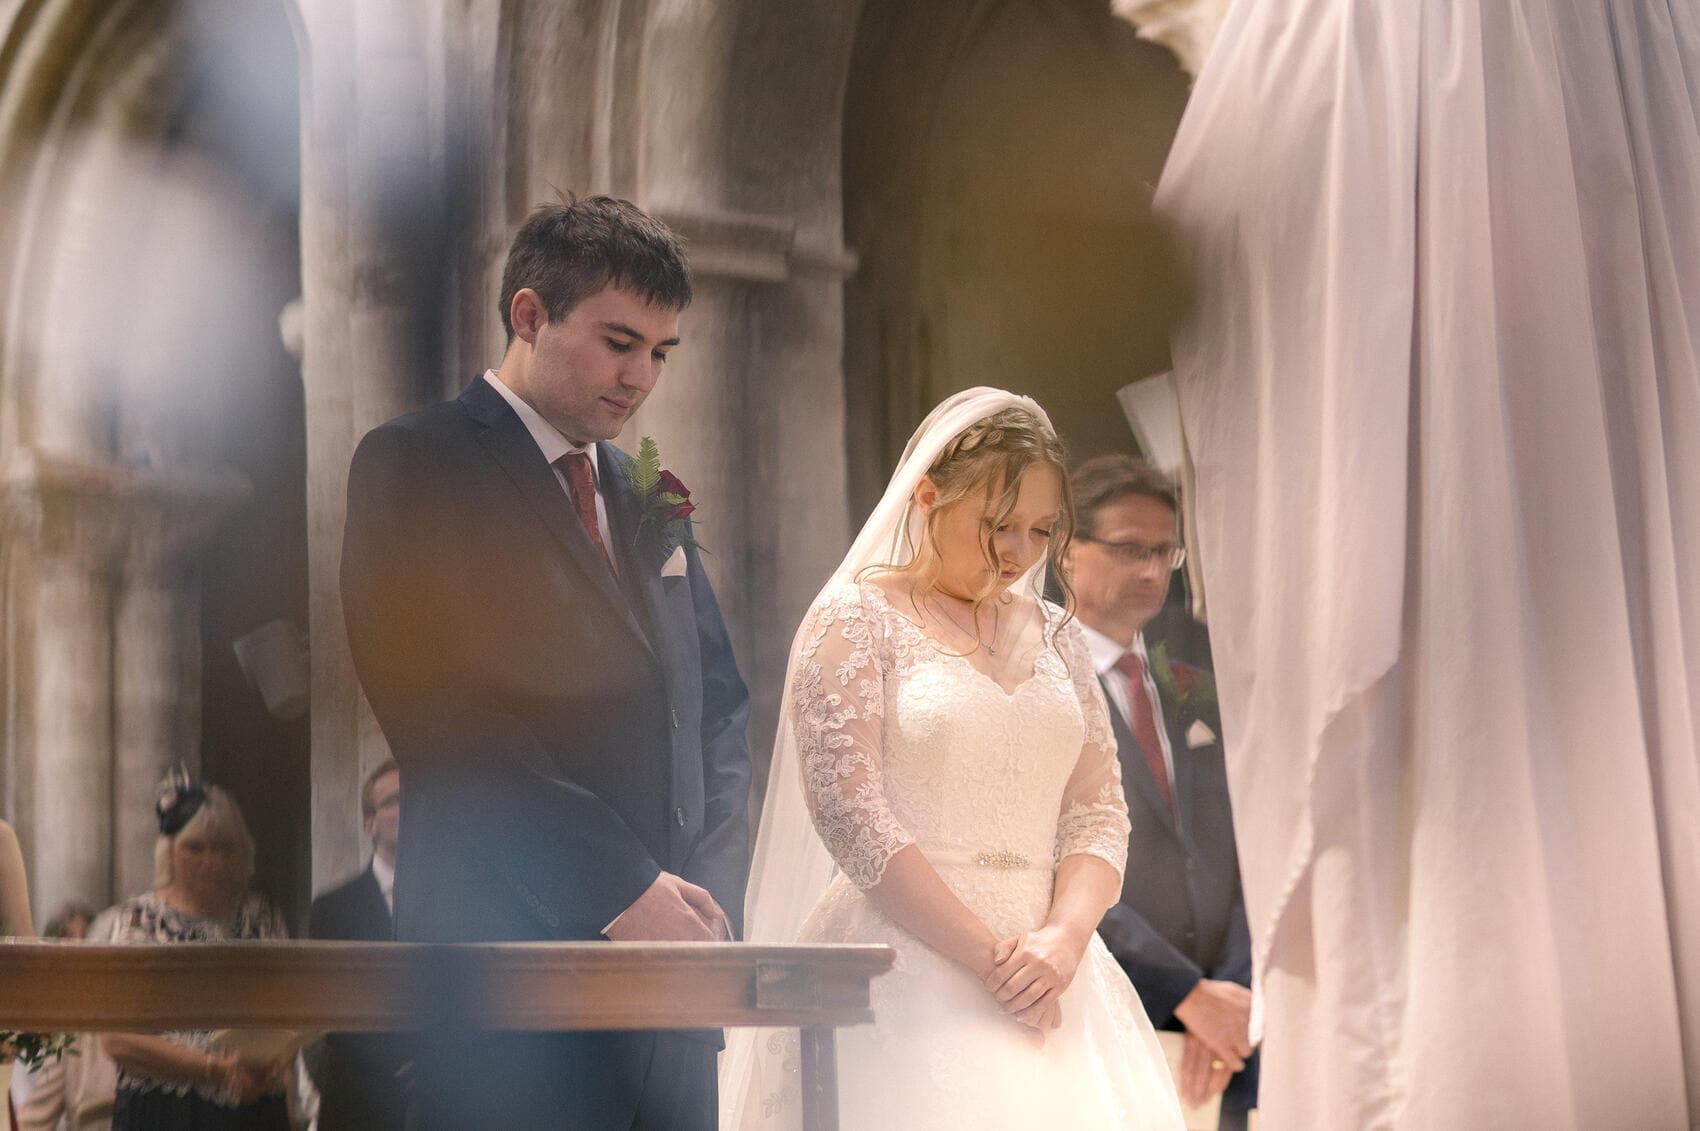 Bride and Groom standing at the Alter at Christchurch Priory wedding ceremony